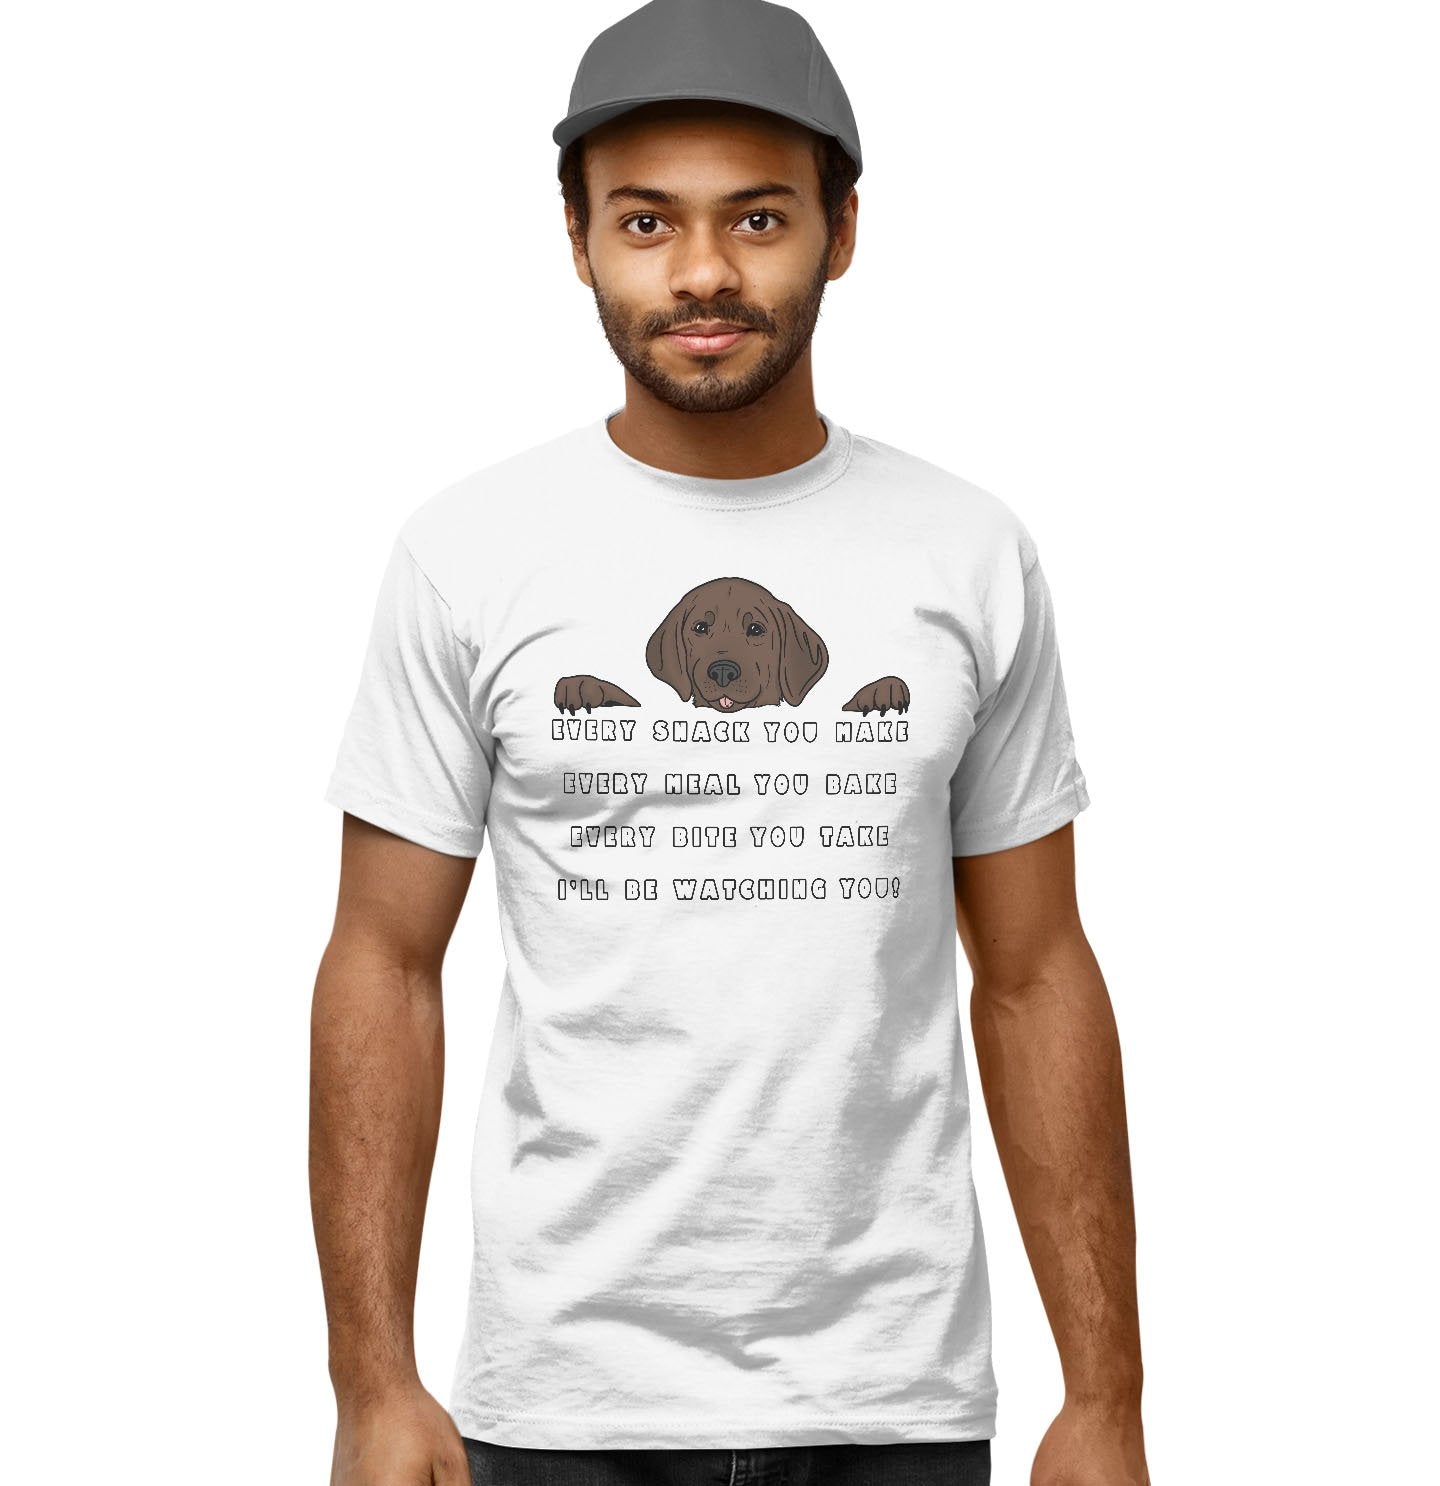 Every Snack Chocolate Lab - Adult Unisex T-Shirt